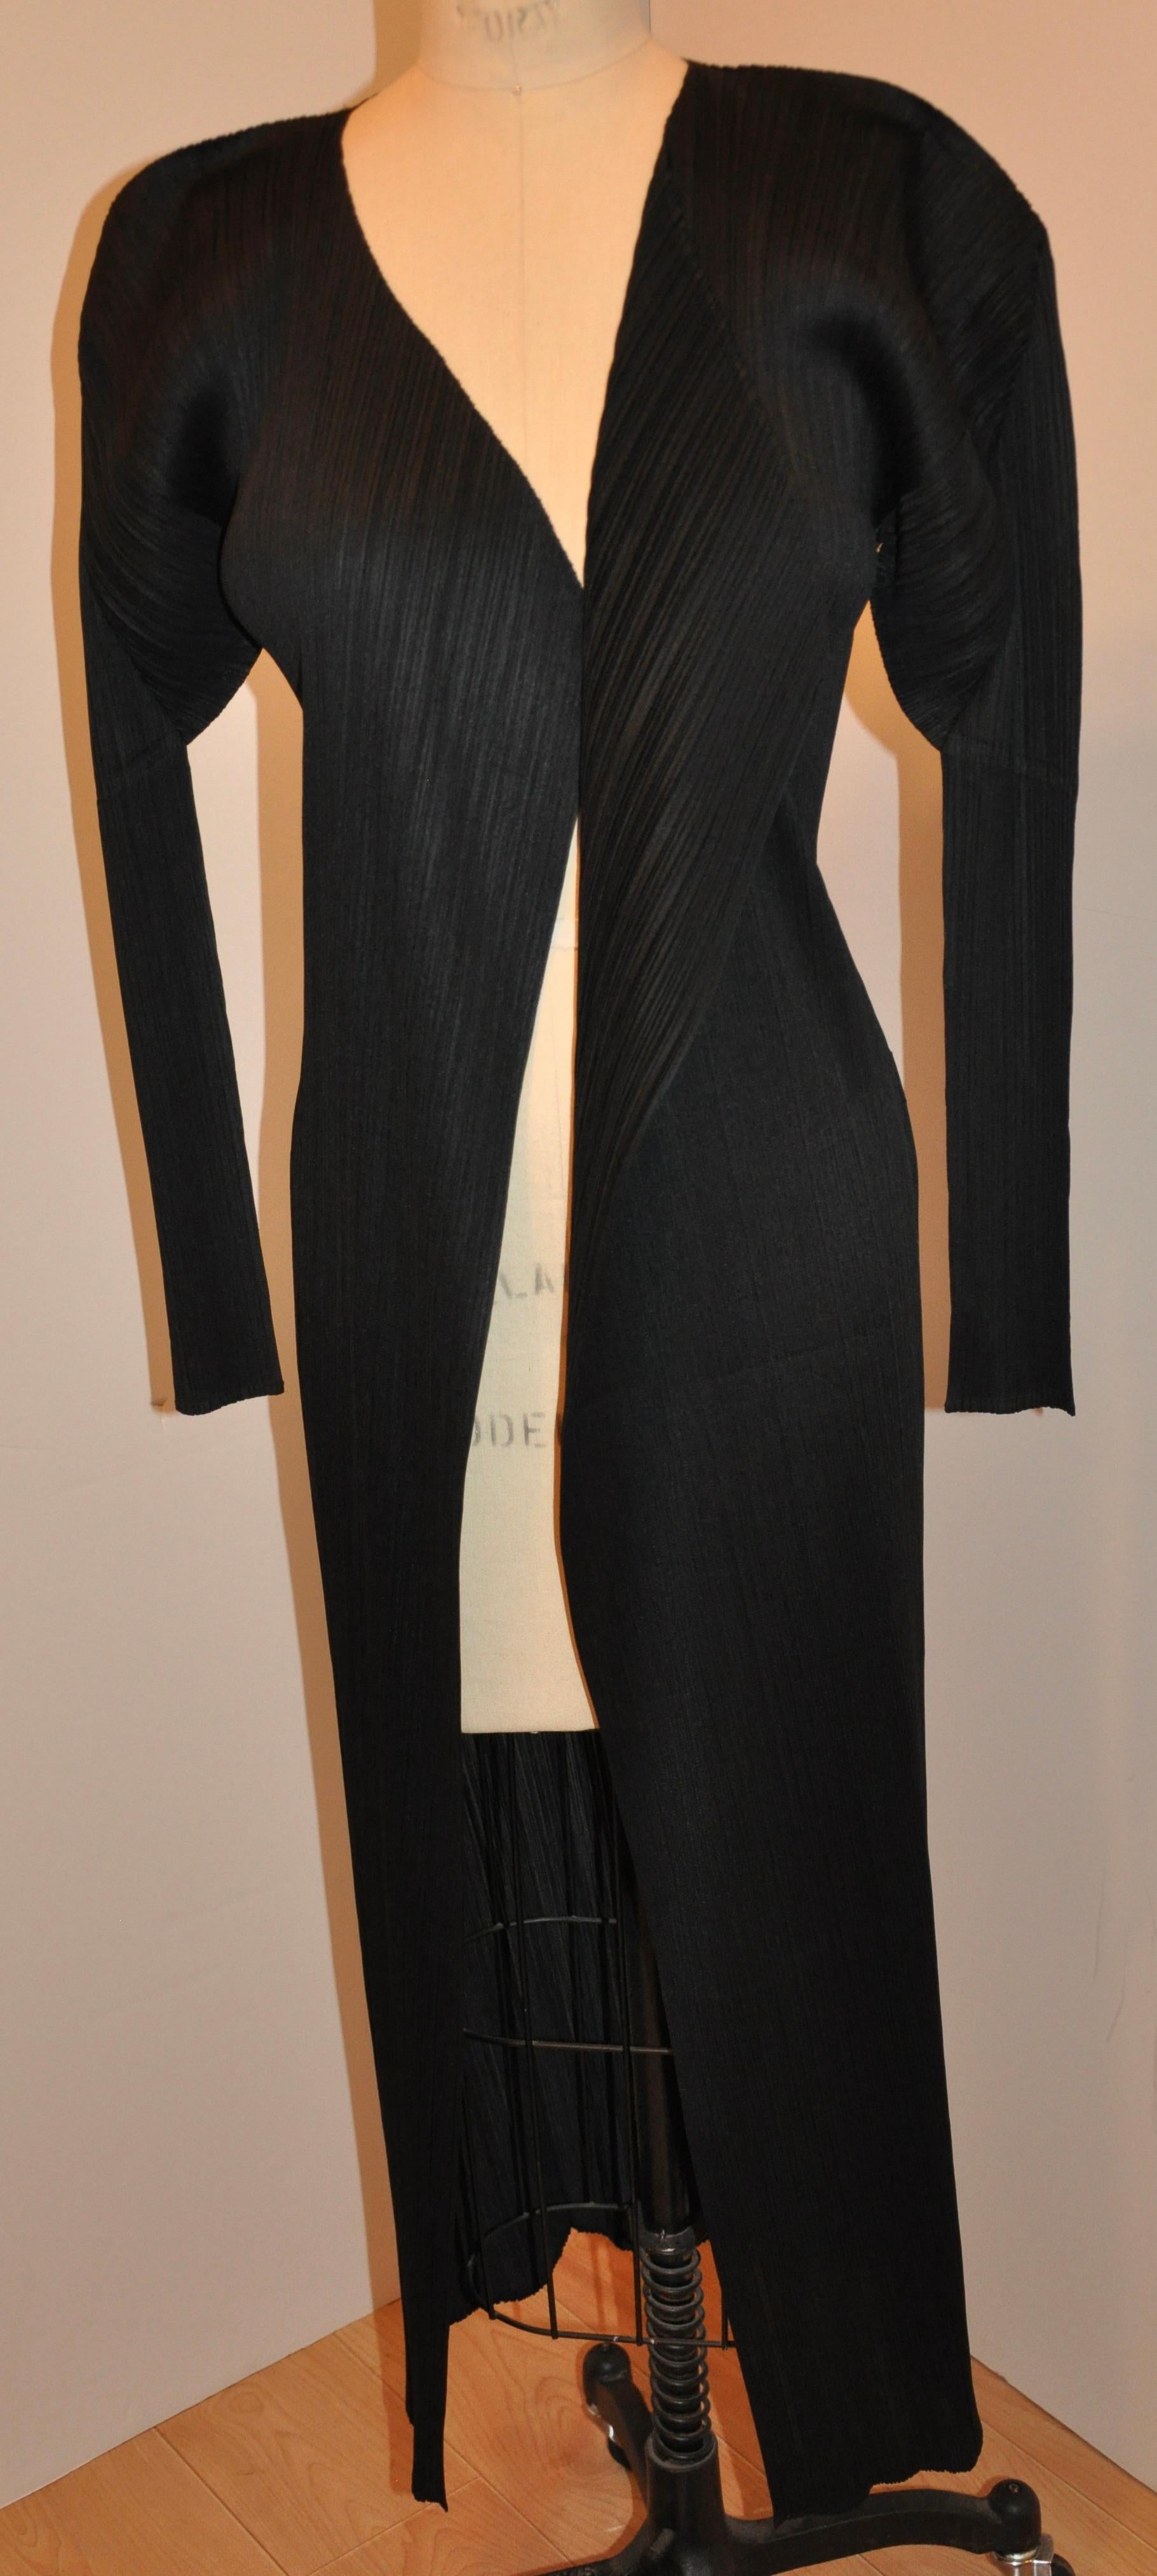    Issey Miyake wonderful iconic signature jet-black pleated open coat measures 44 in length in front and 50 inches in back. Shoulders are 17 1/2 inches across, underarm circumference is 36 inches, waist is 32 inches, hips are 36 inches, sleeves are